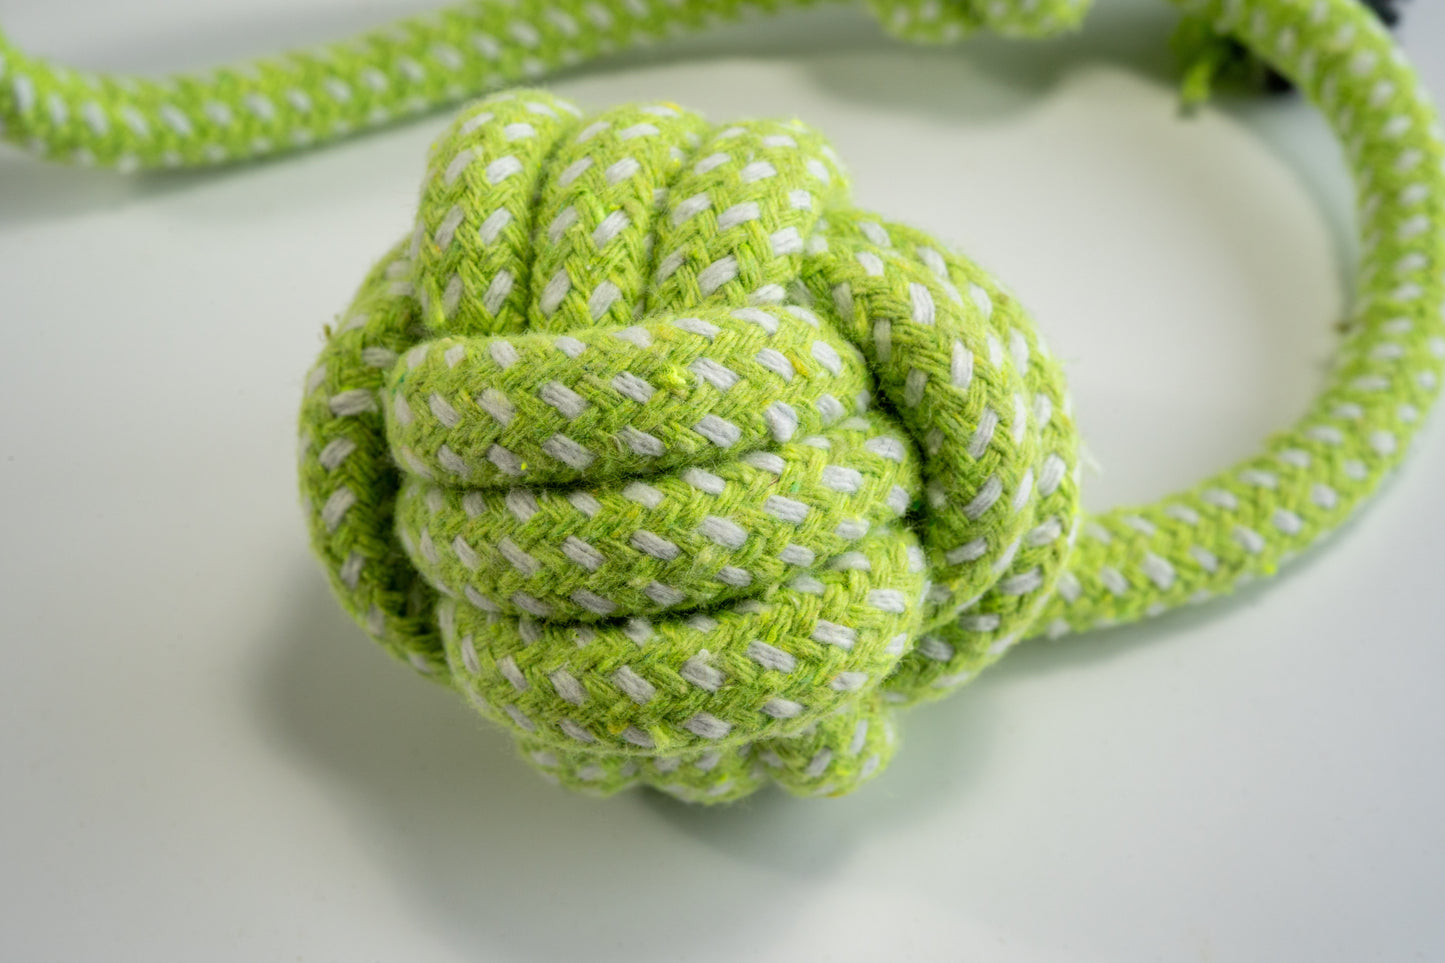 Close-up view of the cotton rope monkey handle ball for dogs.